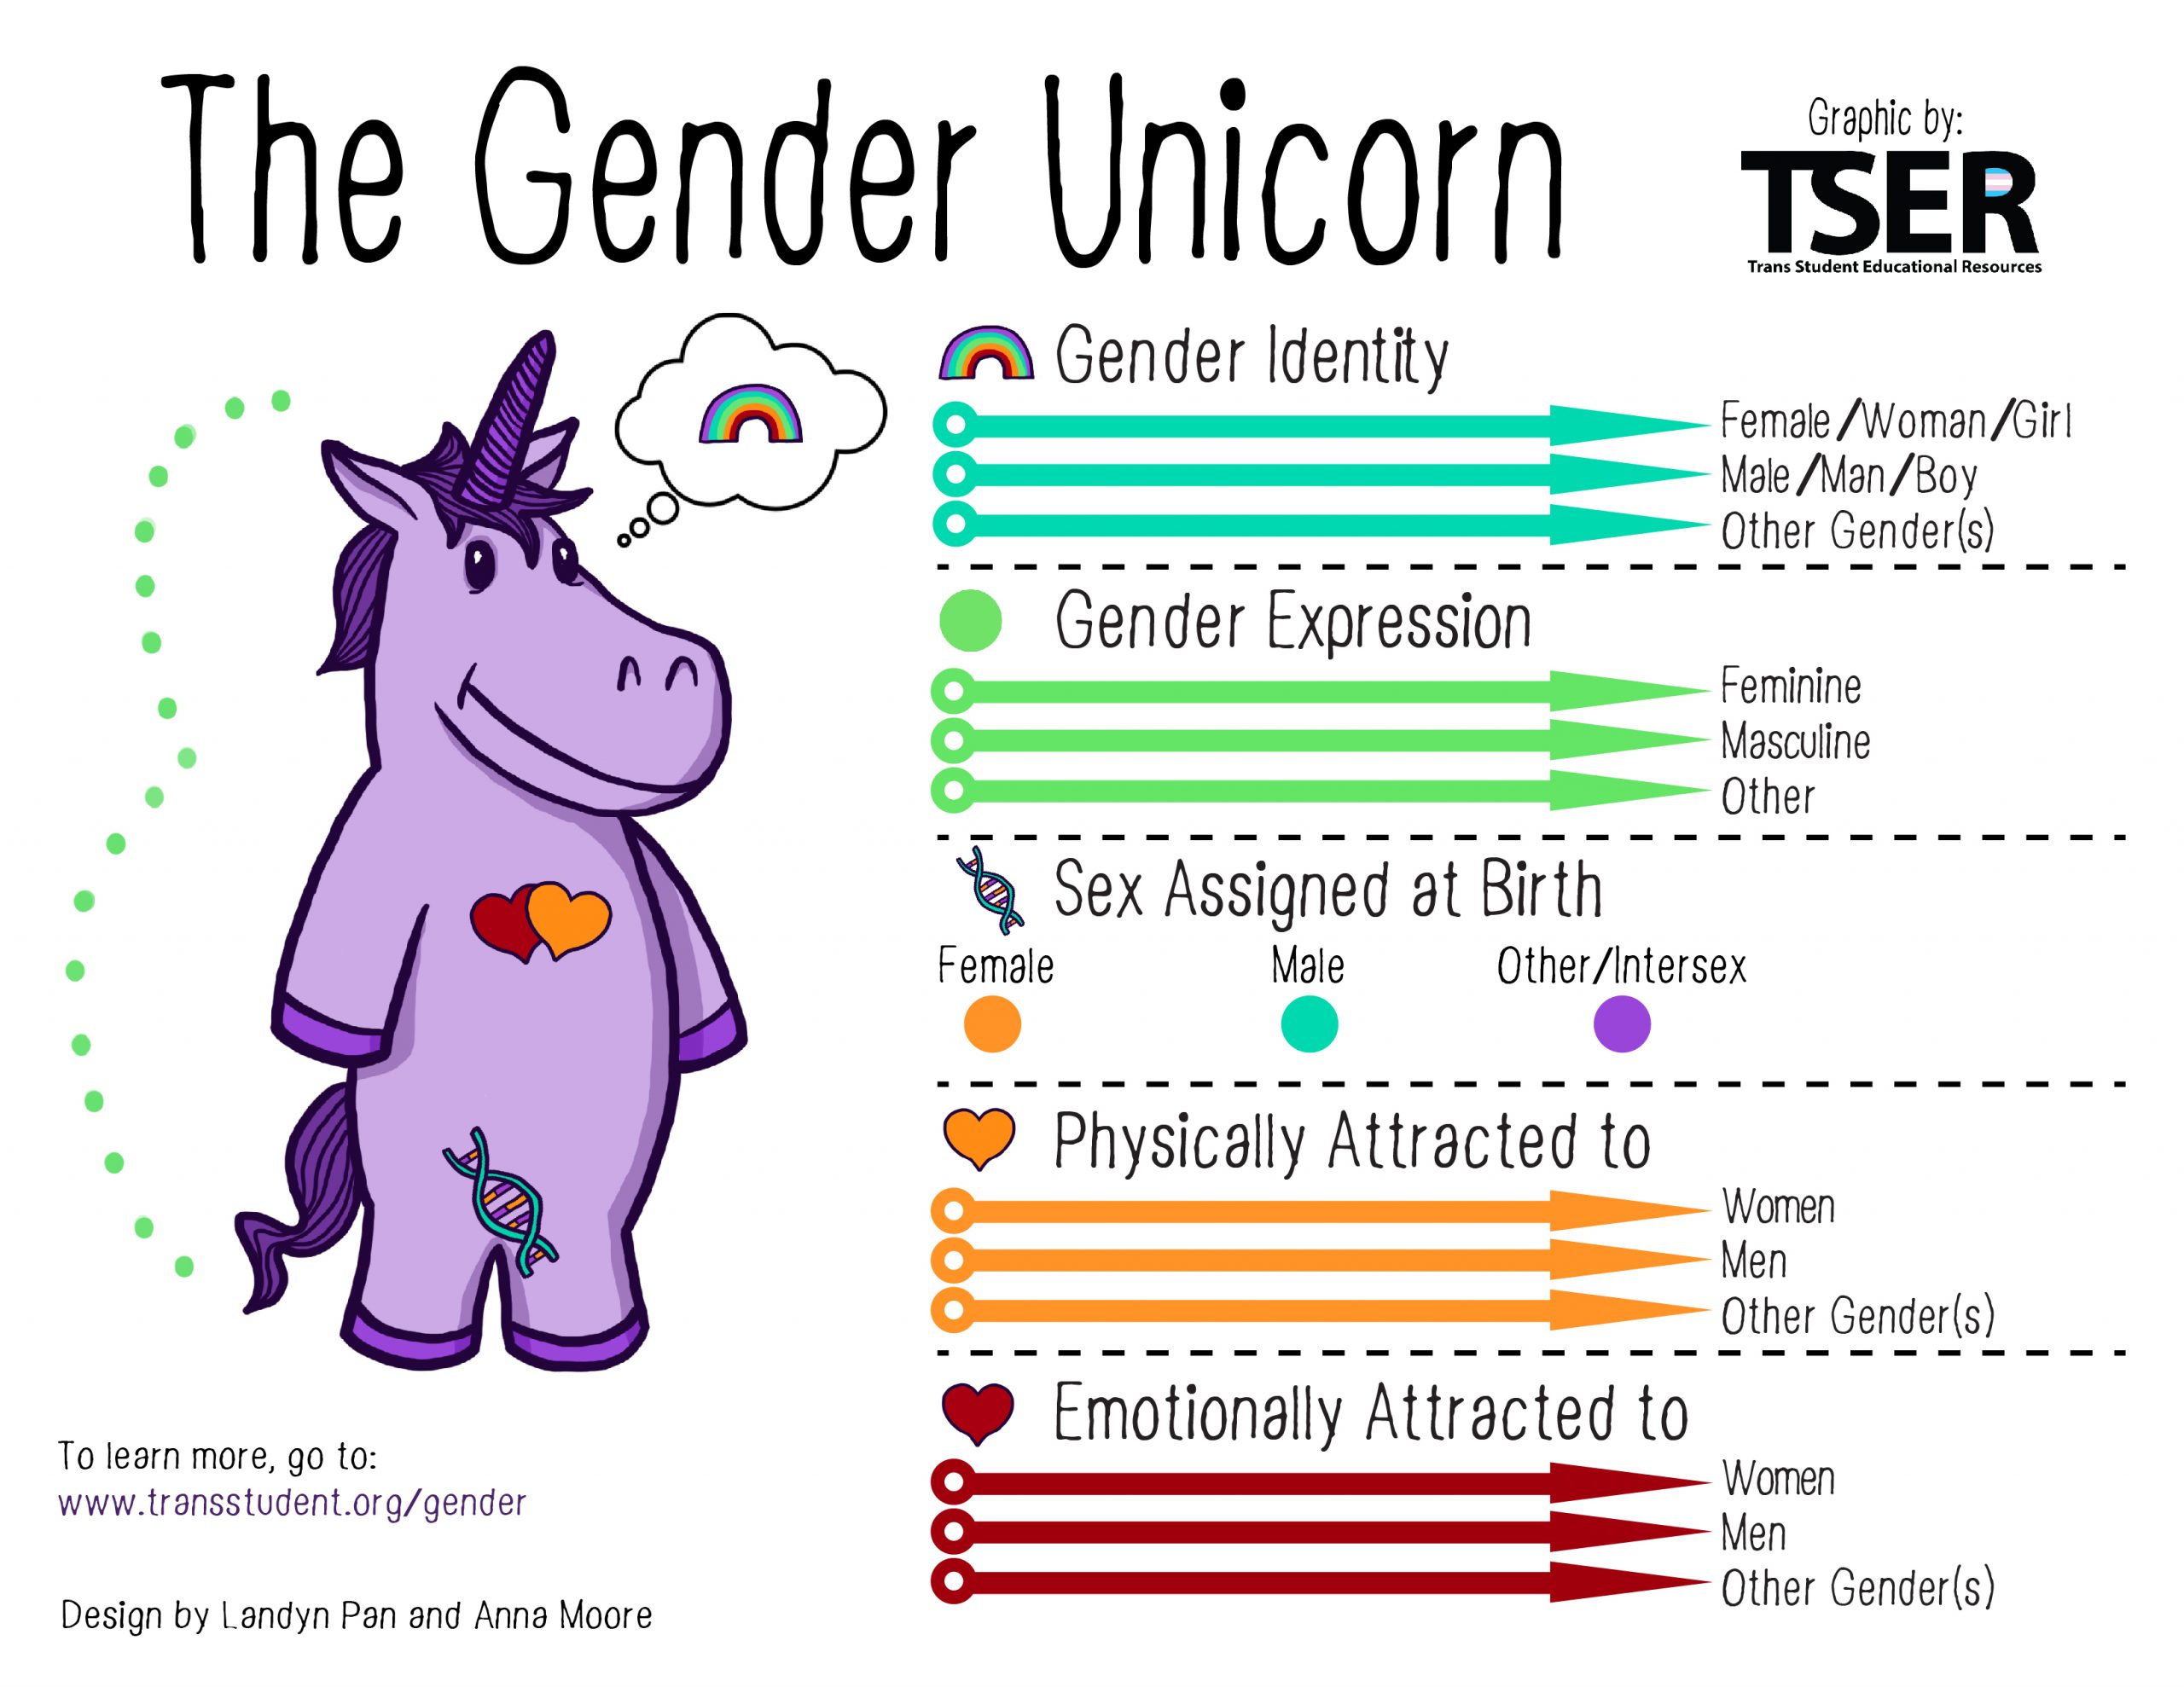 The Gender Unicorn graphic by TSER